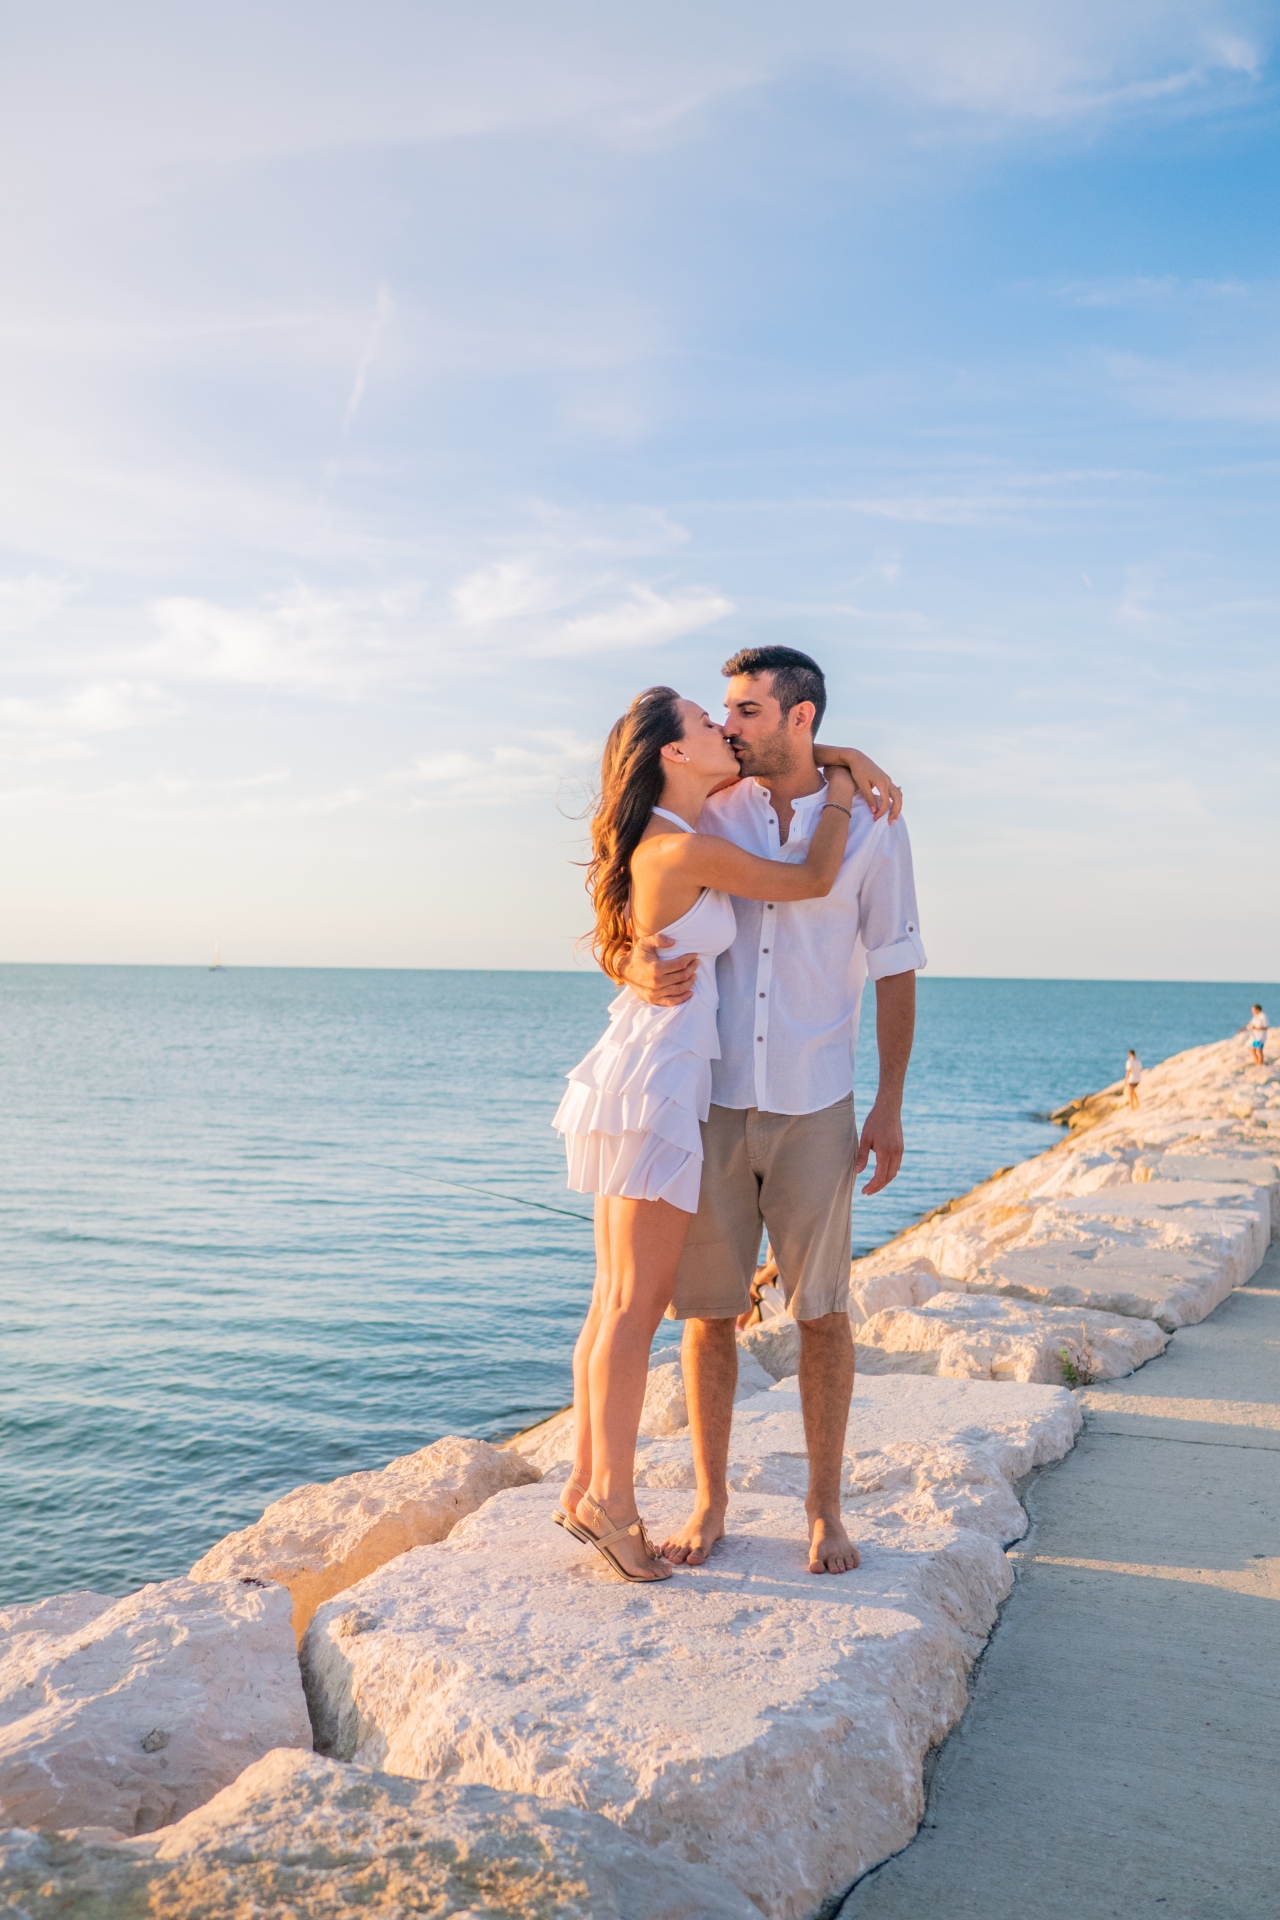 ﻿Engagement pre-wedding photoshoot in the port of Rimini 